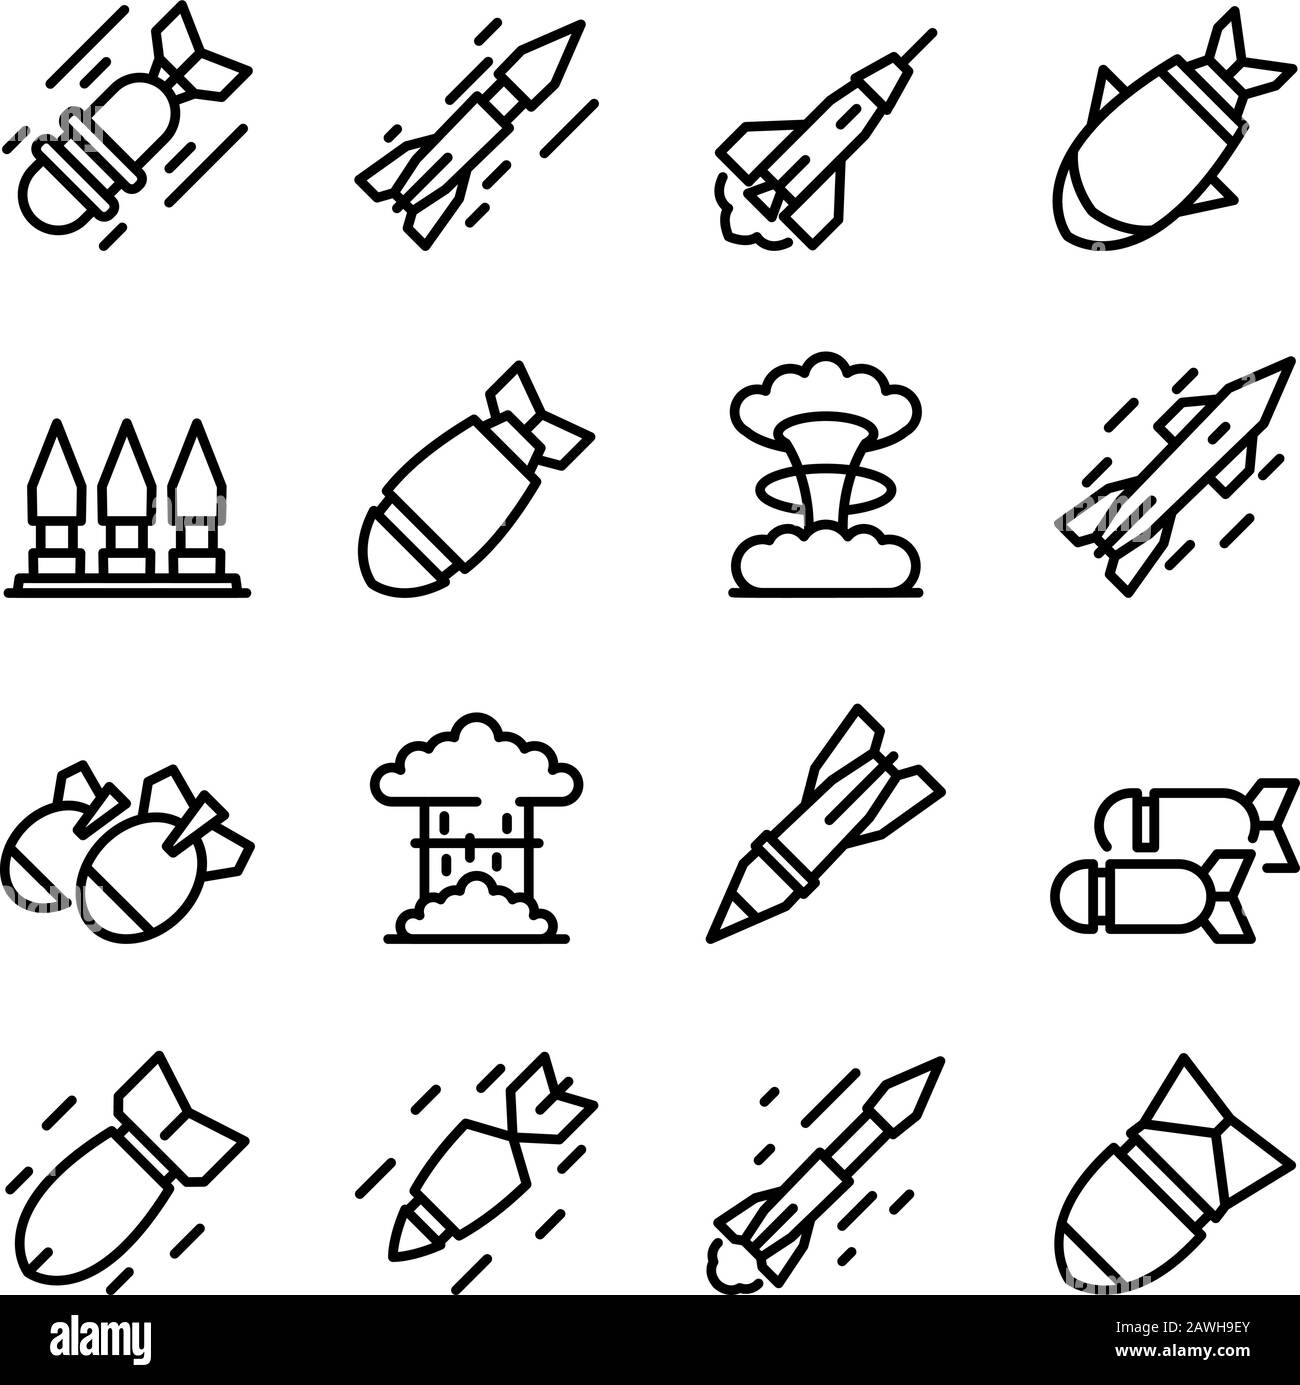 Missile attack icons set, outline style Stock Vector